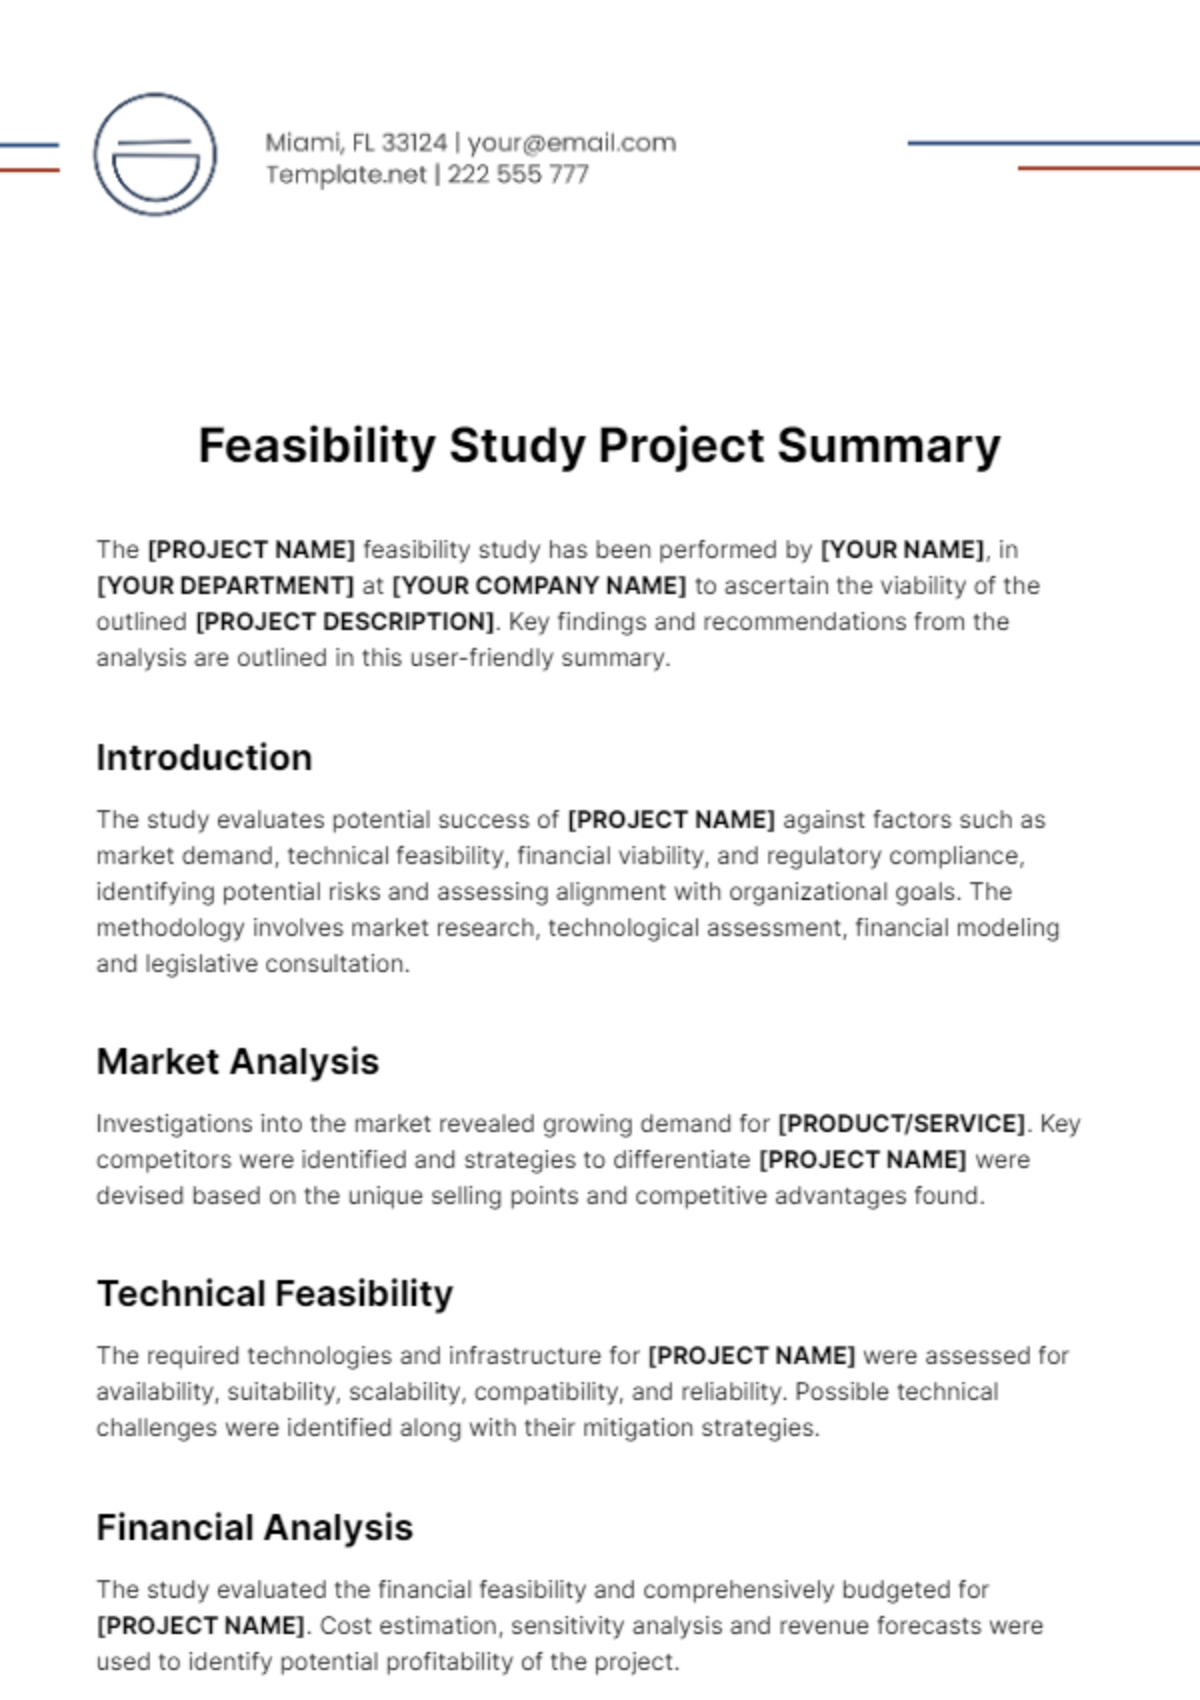 Free Feasibility Study Project Summary Template